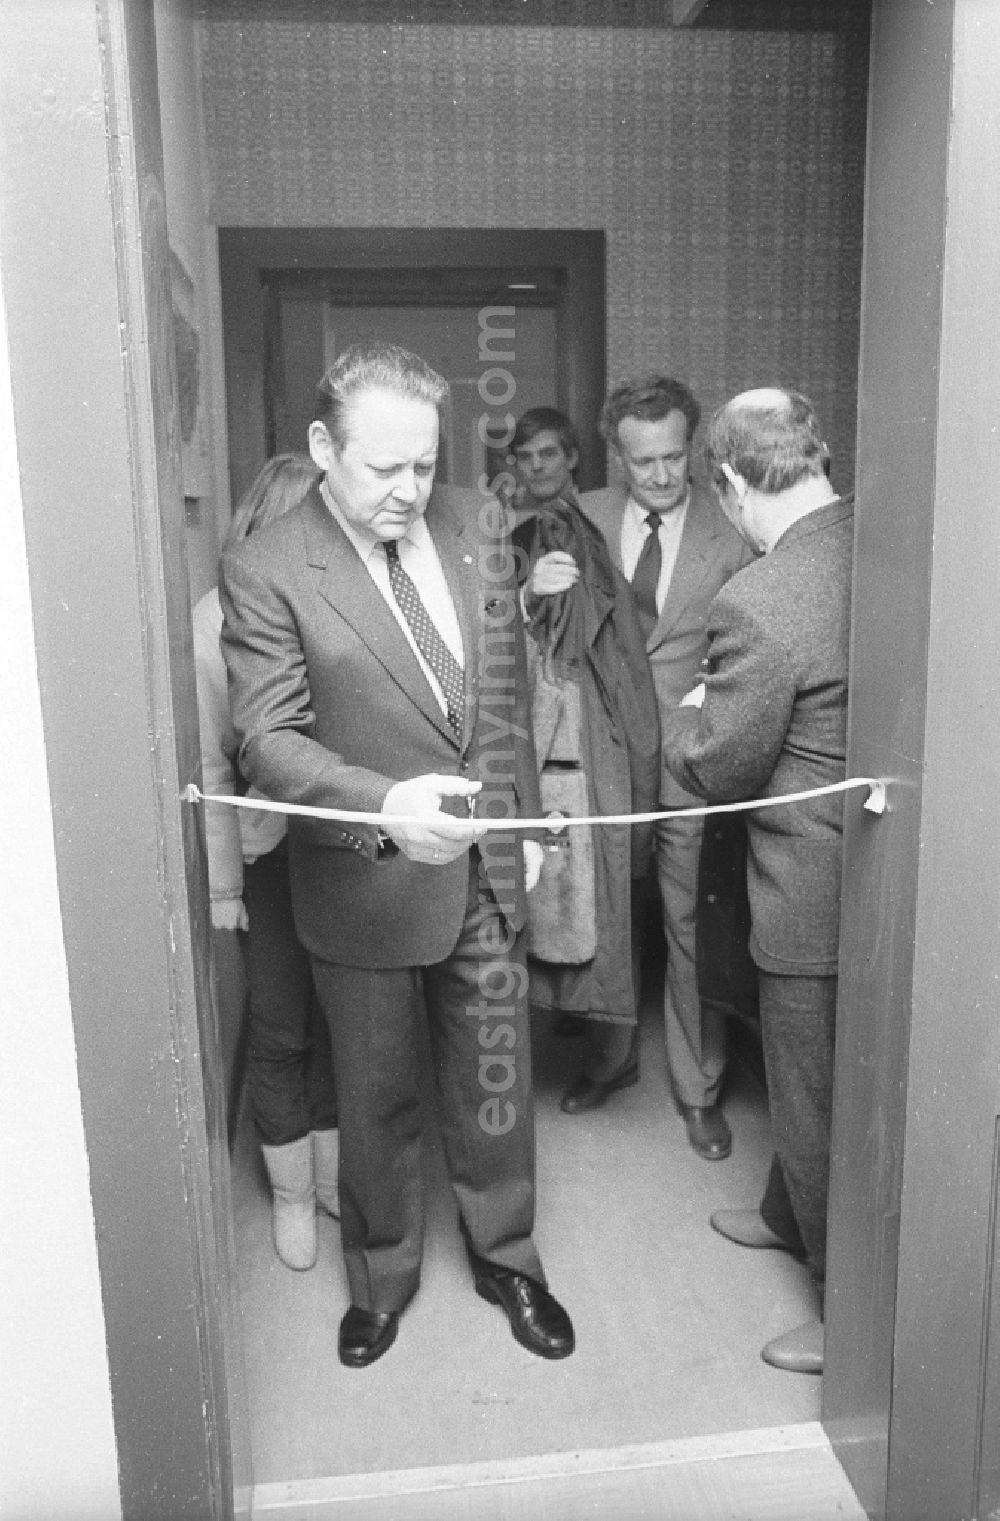 GDR image archive: Berlin - Opening of the history cabinet of today's House of Liberation in Leninallee, today's Landsberger Allee 563 in the district Marzahn in Berlin, the former capital of the GDR, German Democratic Republic. Guenter Schabowski, Secretary of the Central Committee of the SED Socialist Unity Party of Germany, cuts the opening ribbon in the building